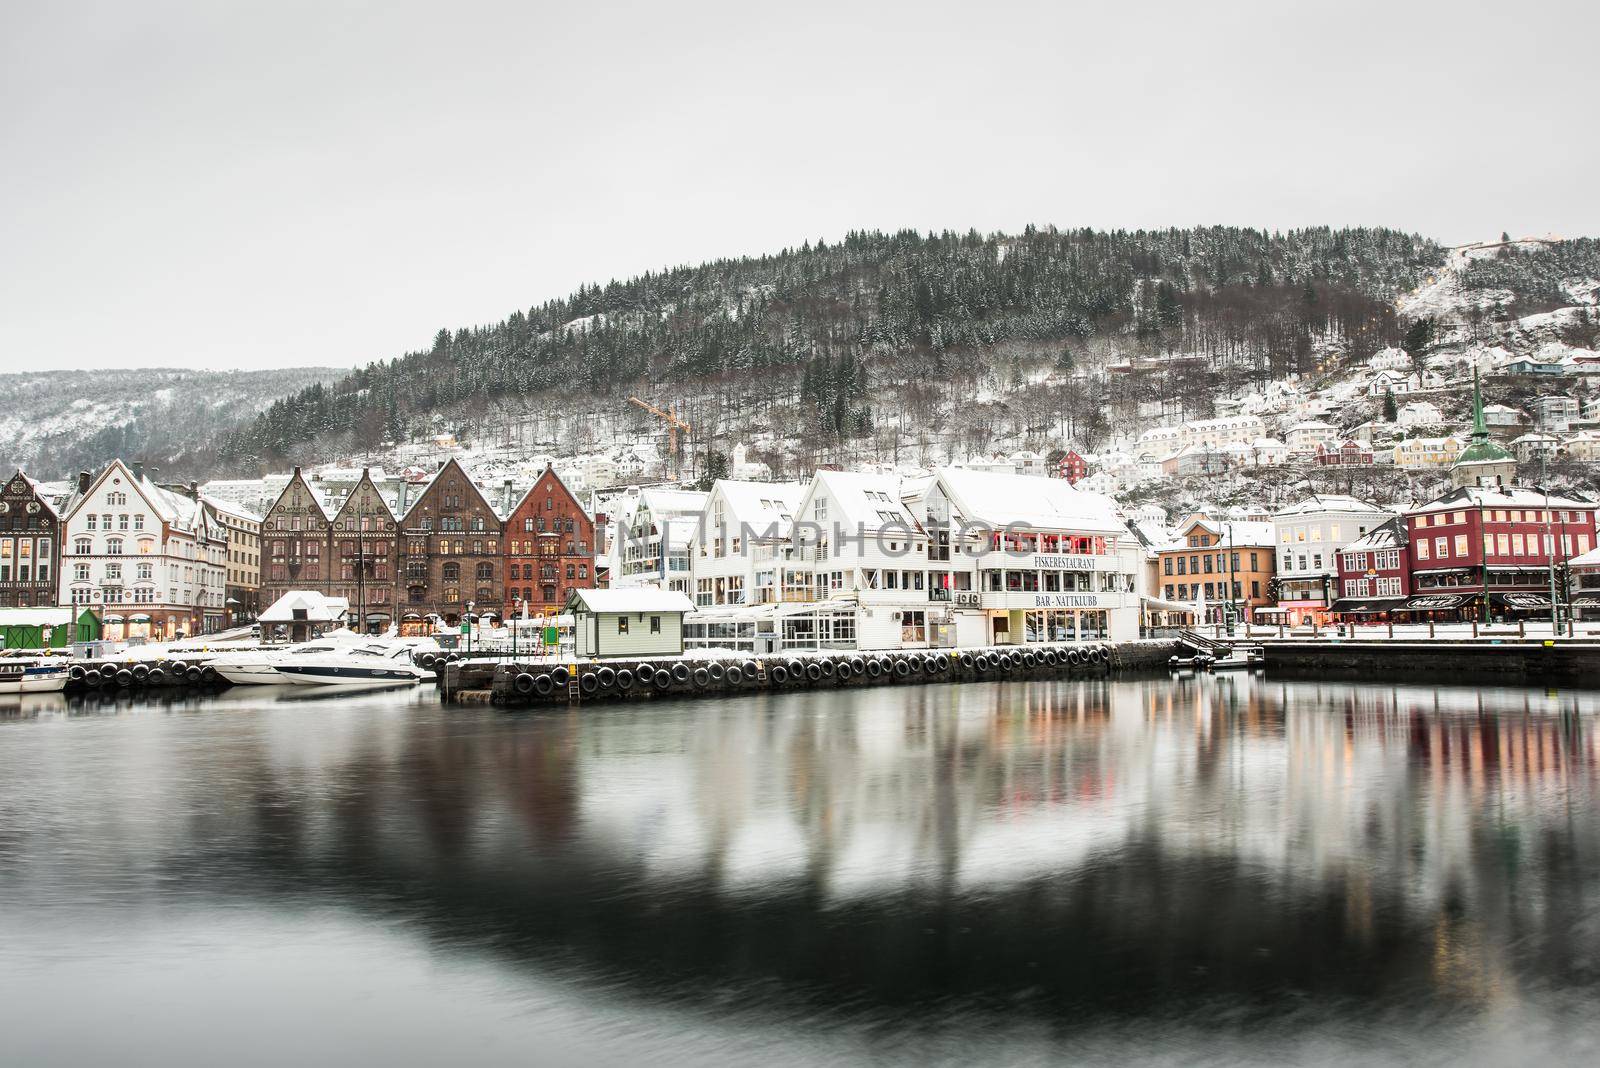 Bergen, Norway - December 29, 2014: Famous Bryggen street with wooden colored houses in Bergen at Christmas, Norway